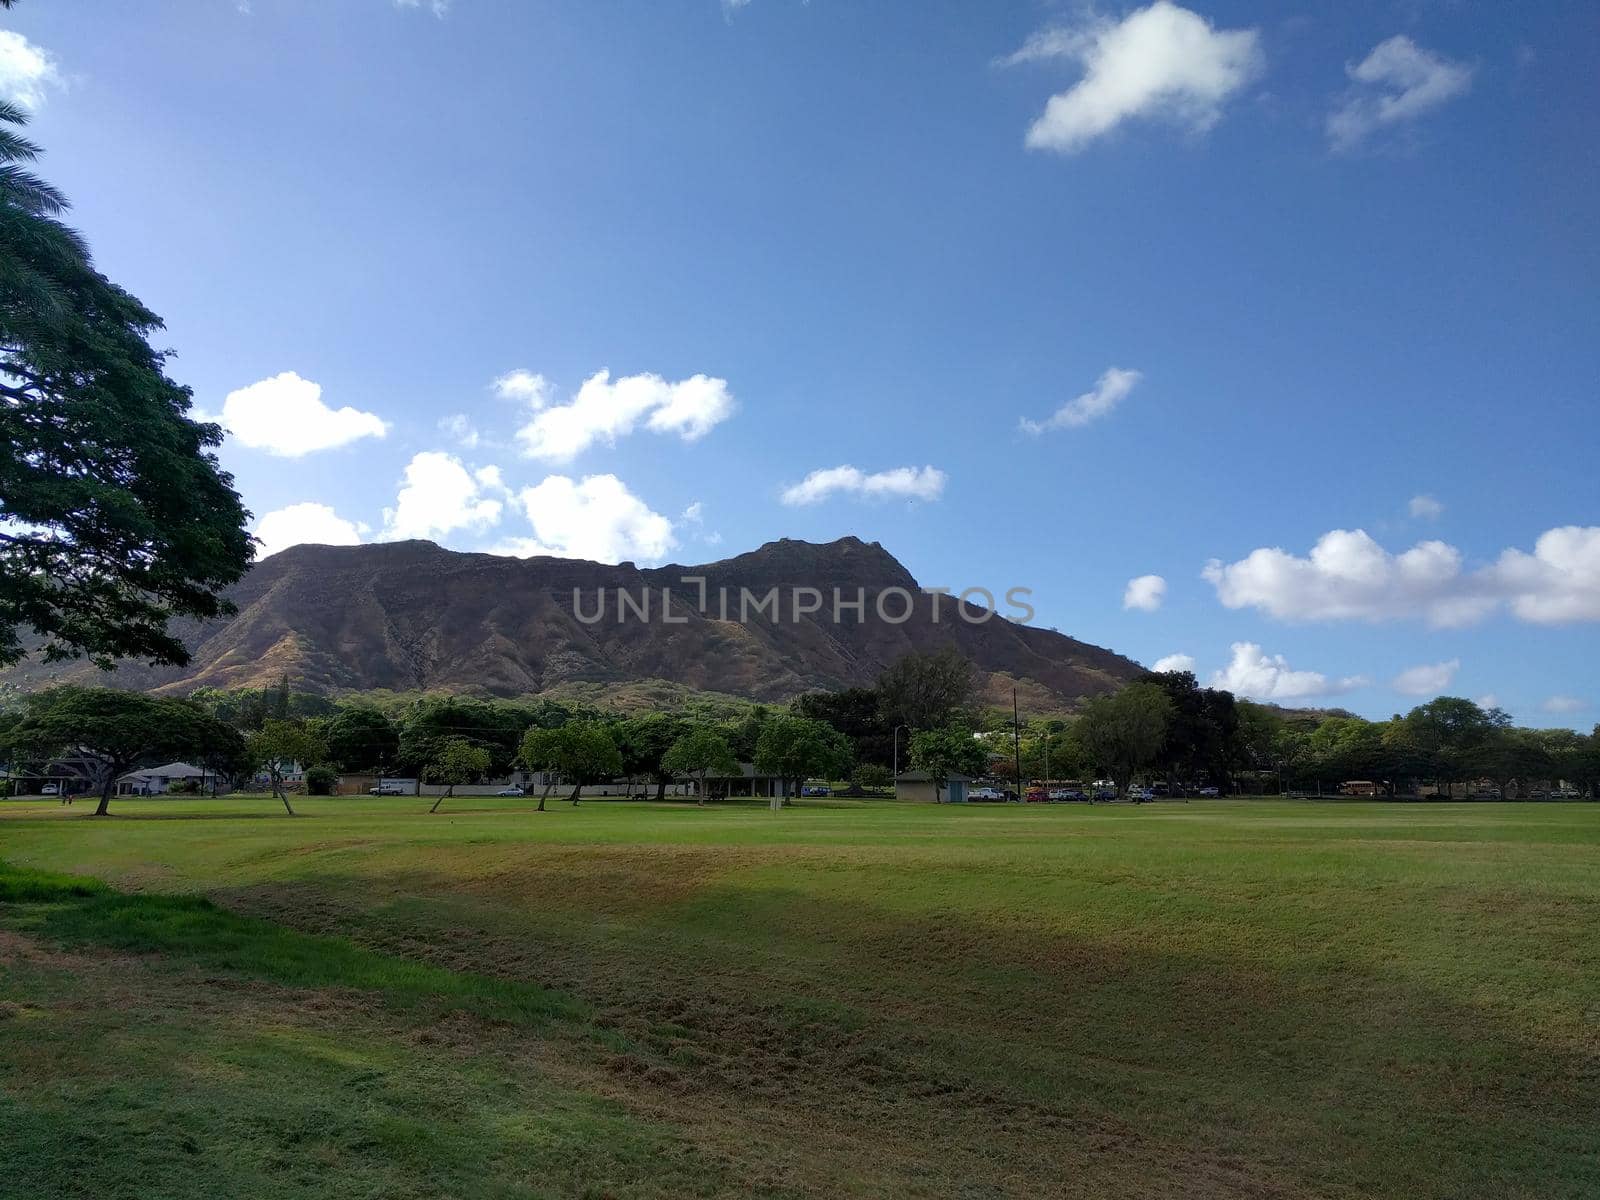 Kapiolani Park at during day with Diamond Head and clouds in the distance on Oahu, Hawaii.